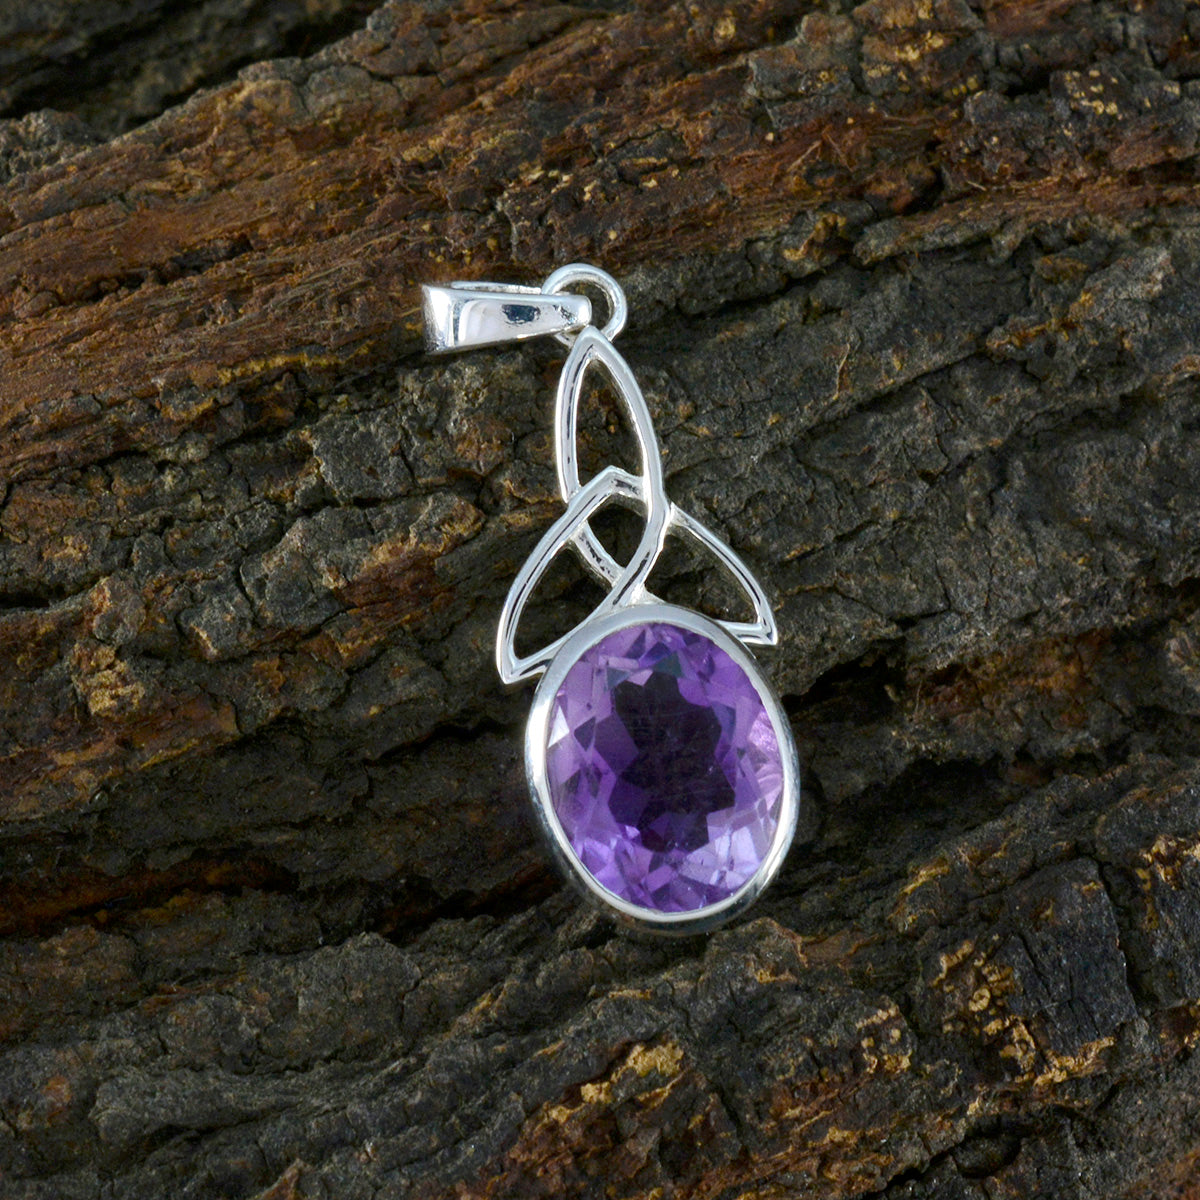 Riyo Foxy Gemstone Oval Faceted Purple Amethyst 982 Sterling Silver Pendant Gift For Good Friday